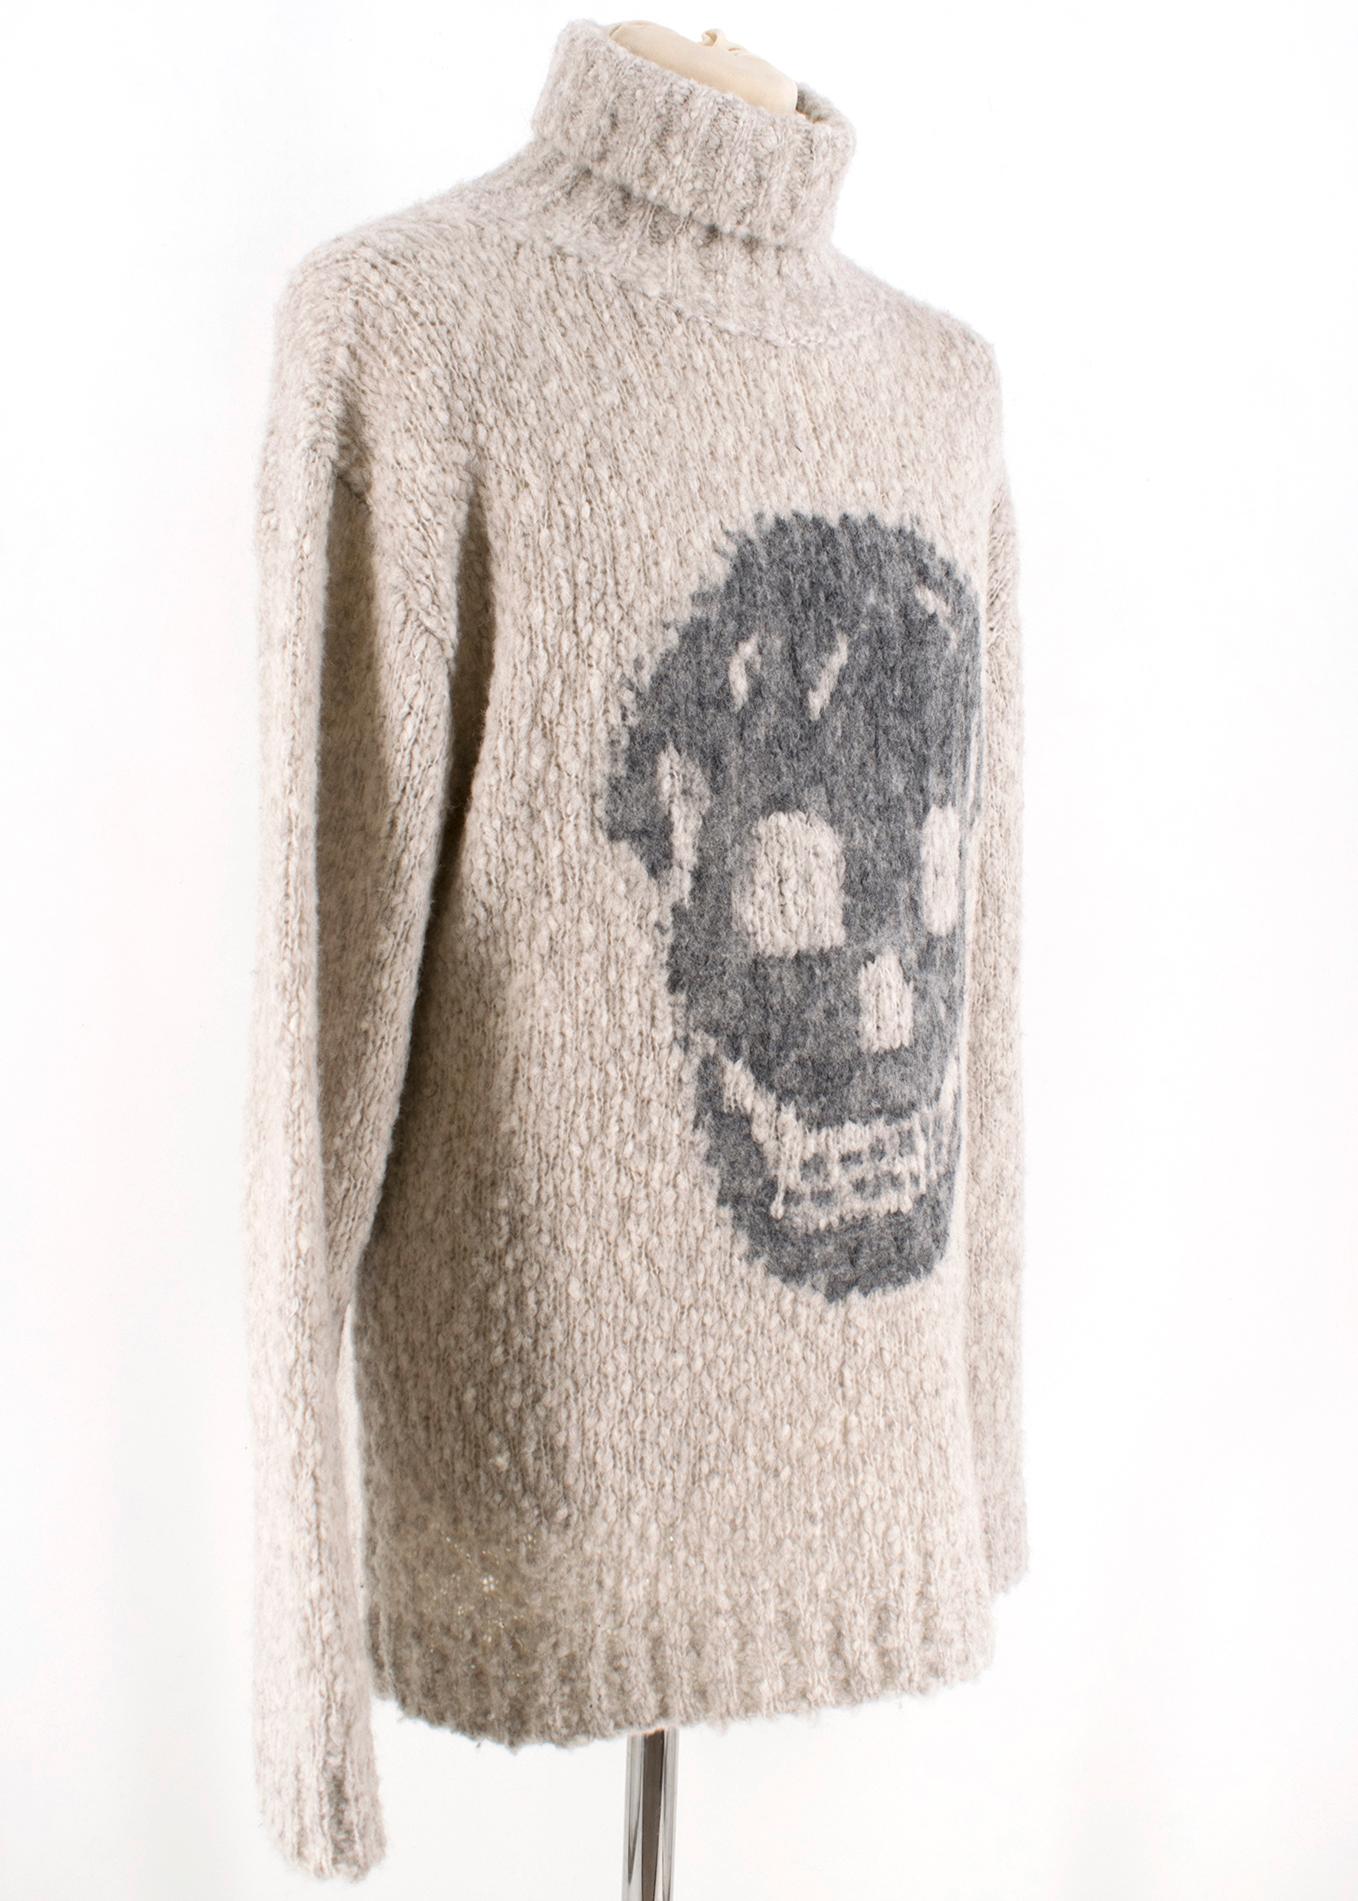 Alexander McQueen grey skull print turtle neck sweater. Featuring big knit, and a prolonged, foldable neck. A loose; slightly oversized fit and lowered shoulder line.

Please note, these items are pre-owned and may show signs of being stored even